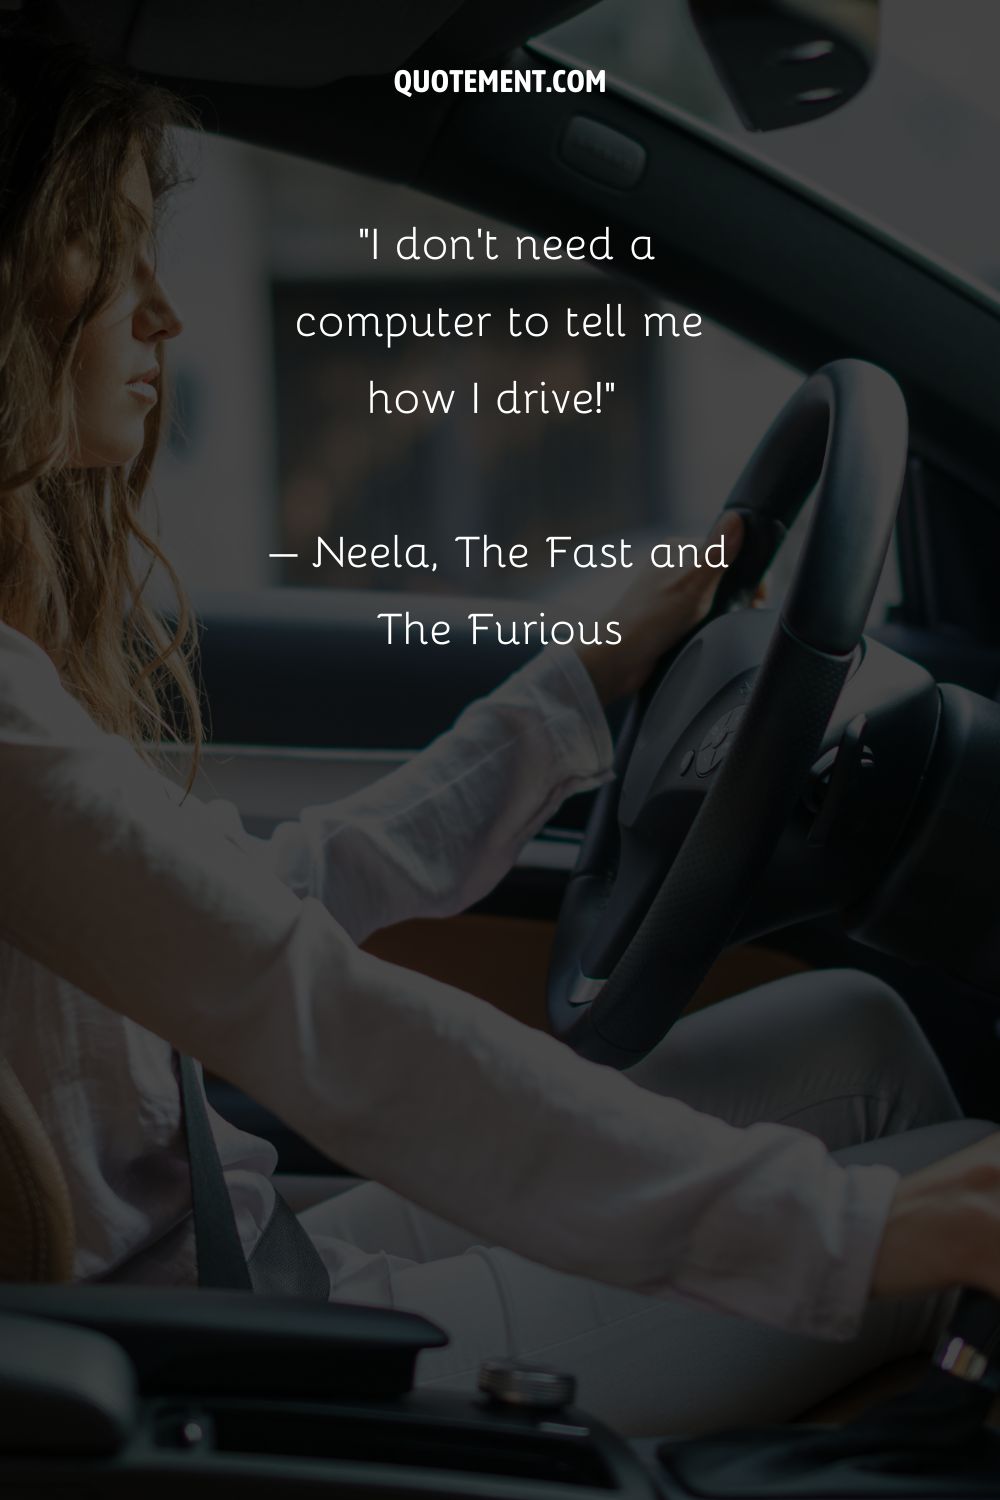 I don’t need a computer to tell me how I drive!